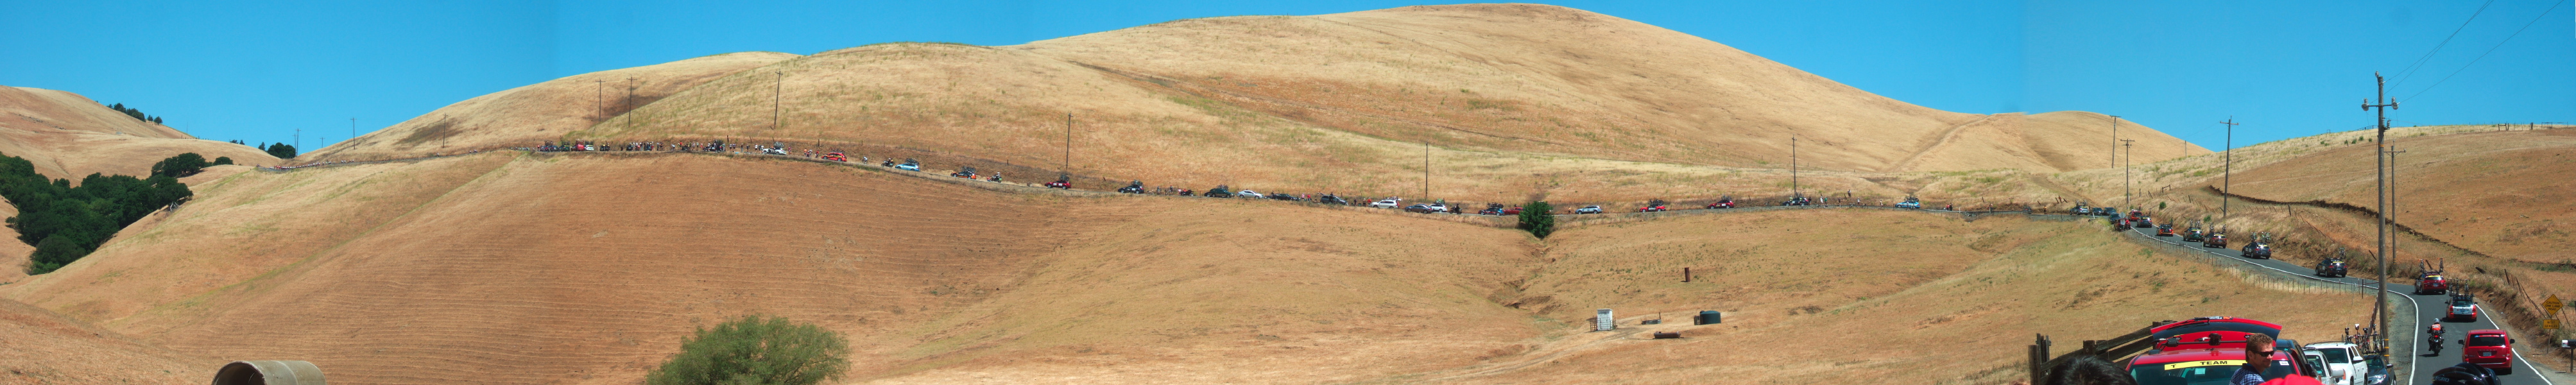 The peloton and support vehicles wind their way up Morgan Territory Road.